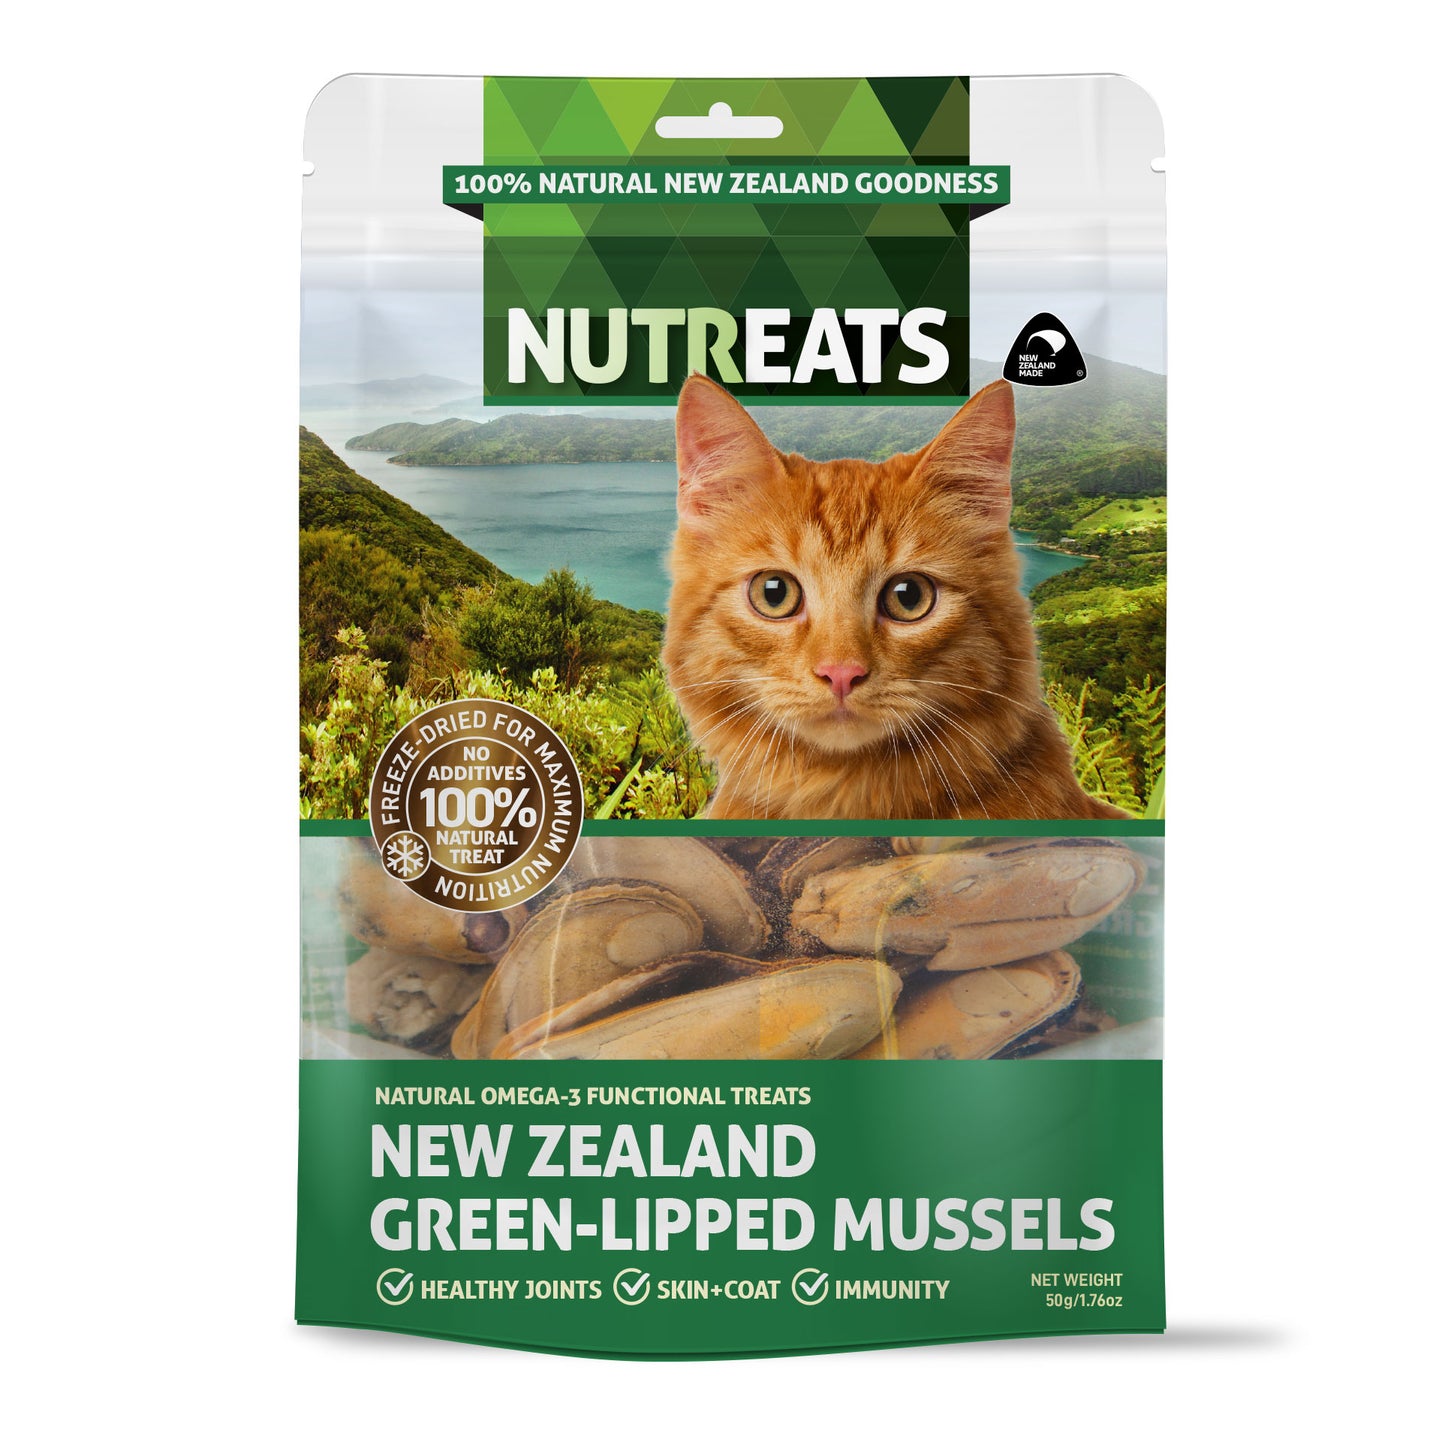 New Zealand Green-lipped mussels. Freeze-dried and 100% natural. Great for supporting healthy joints, skin and glossy coat and may help support cat's immunity. Natural Omega-3 functional treats.